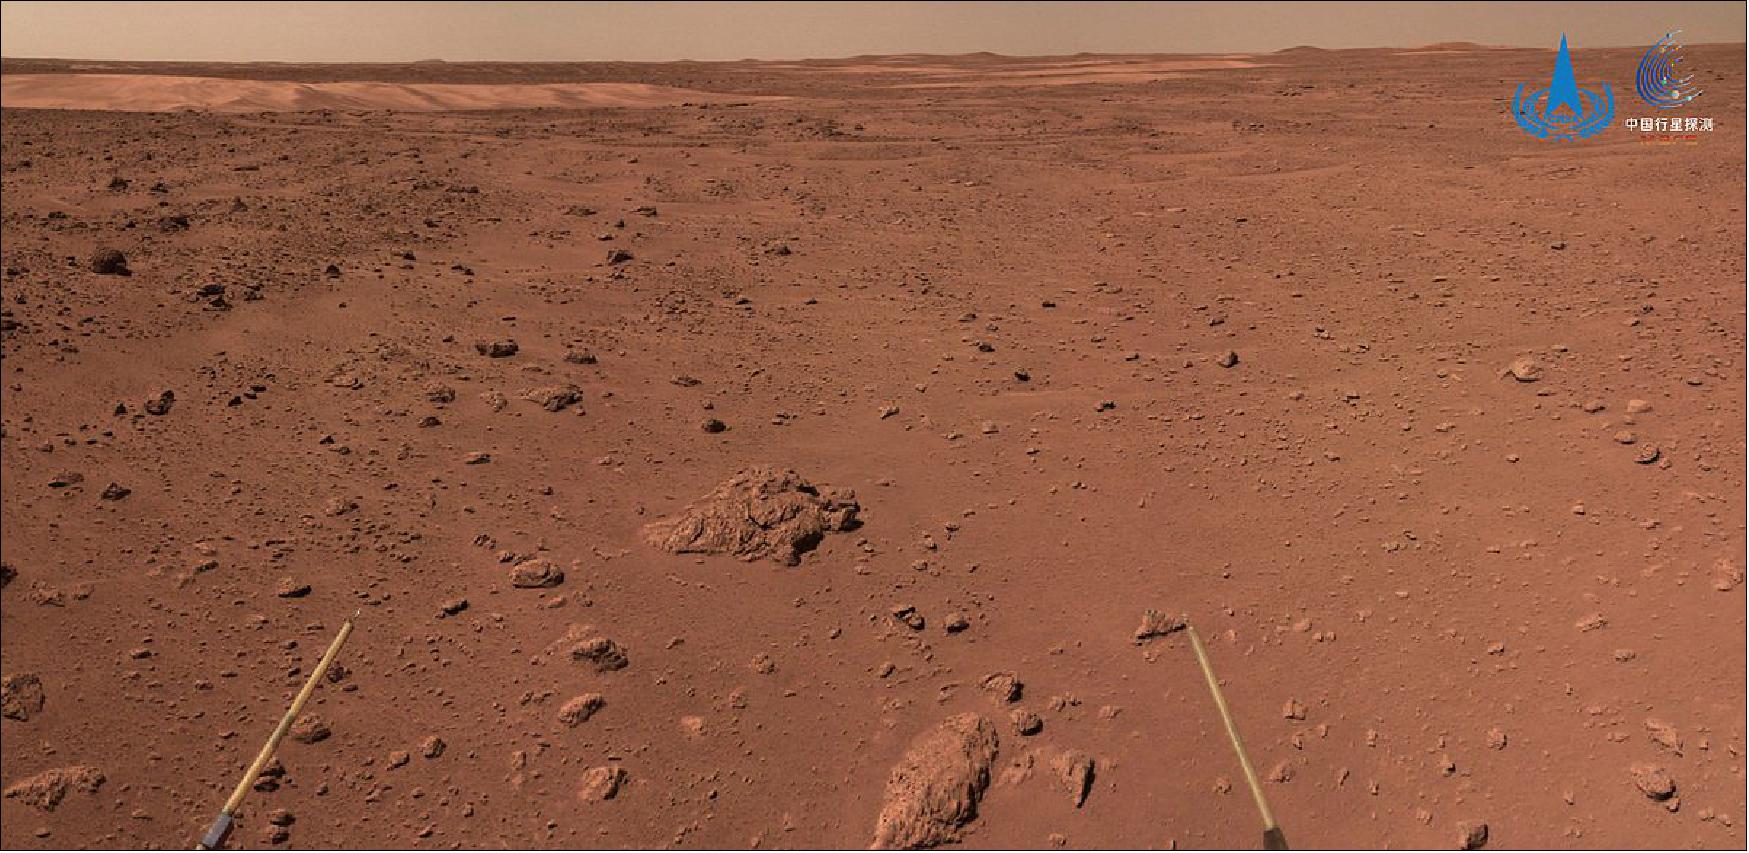 Figure 11: The terrain of Mars is shown in a photo taken by the Zhurong rover, which landed on the Red Planet on May 15 (image credit: China National Space Administration)